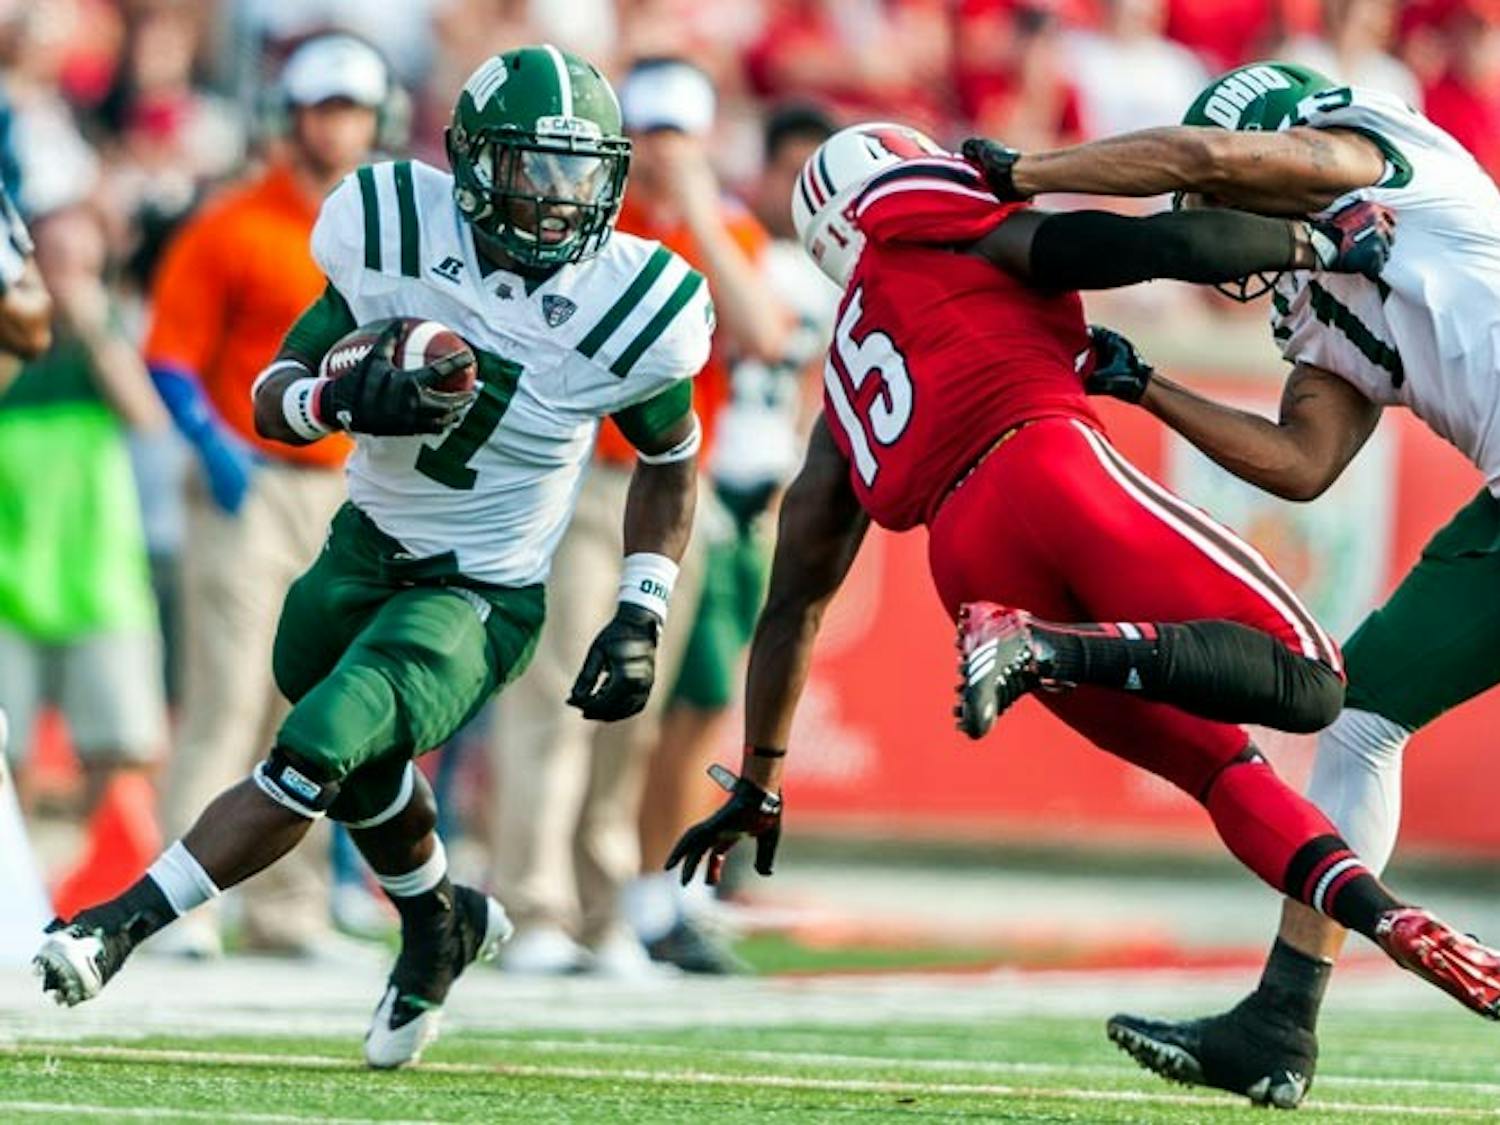 Ohio looks to bounce back from week one loss  